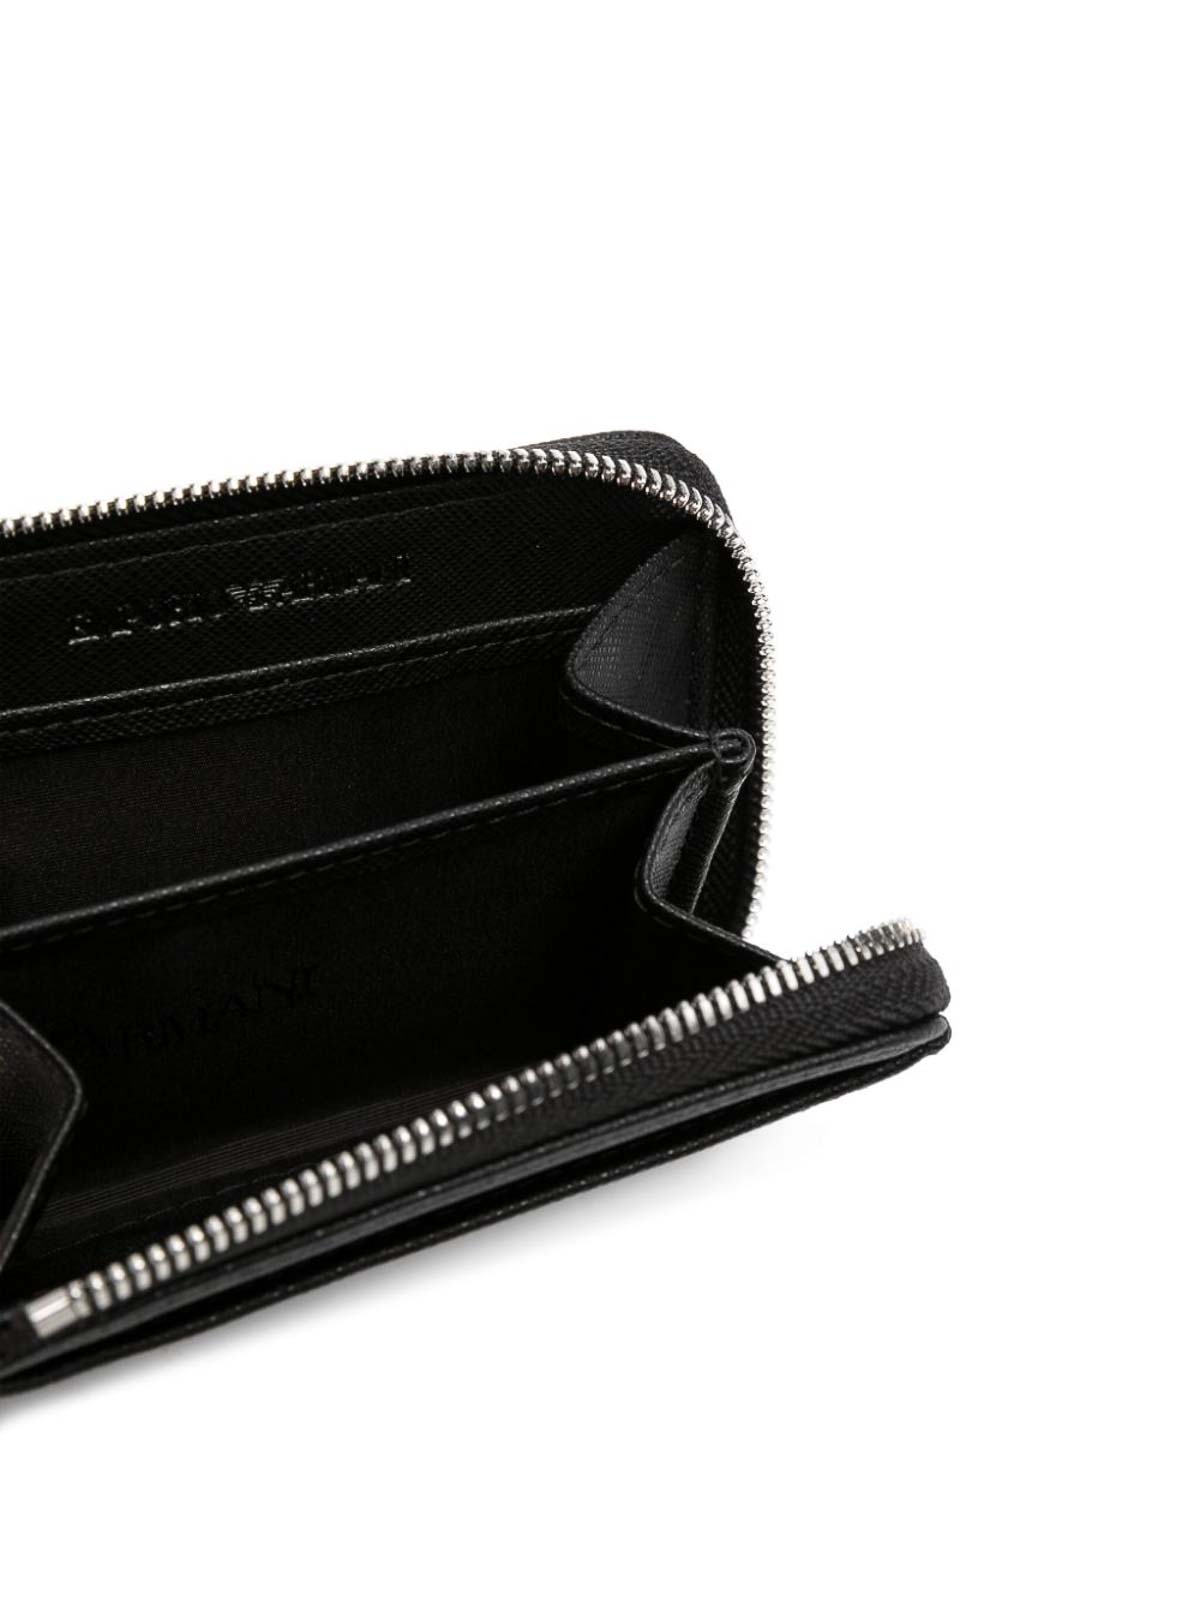 Shop Ea7 Leather Compact Wallet In Black